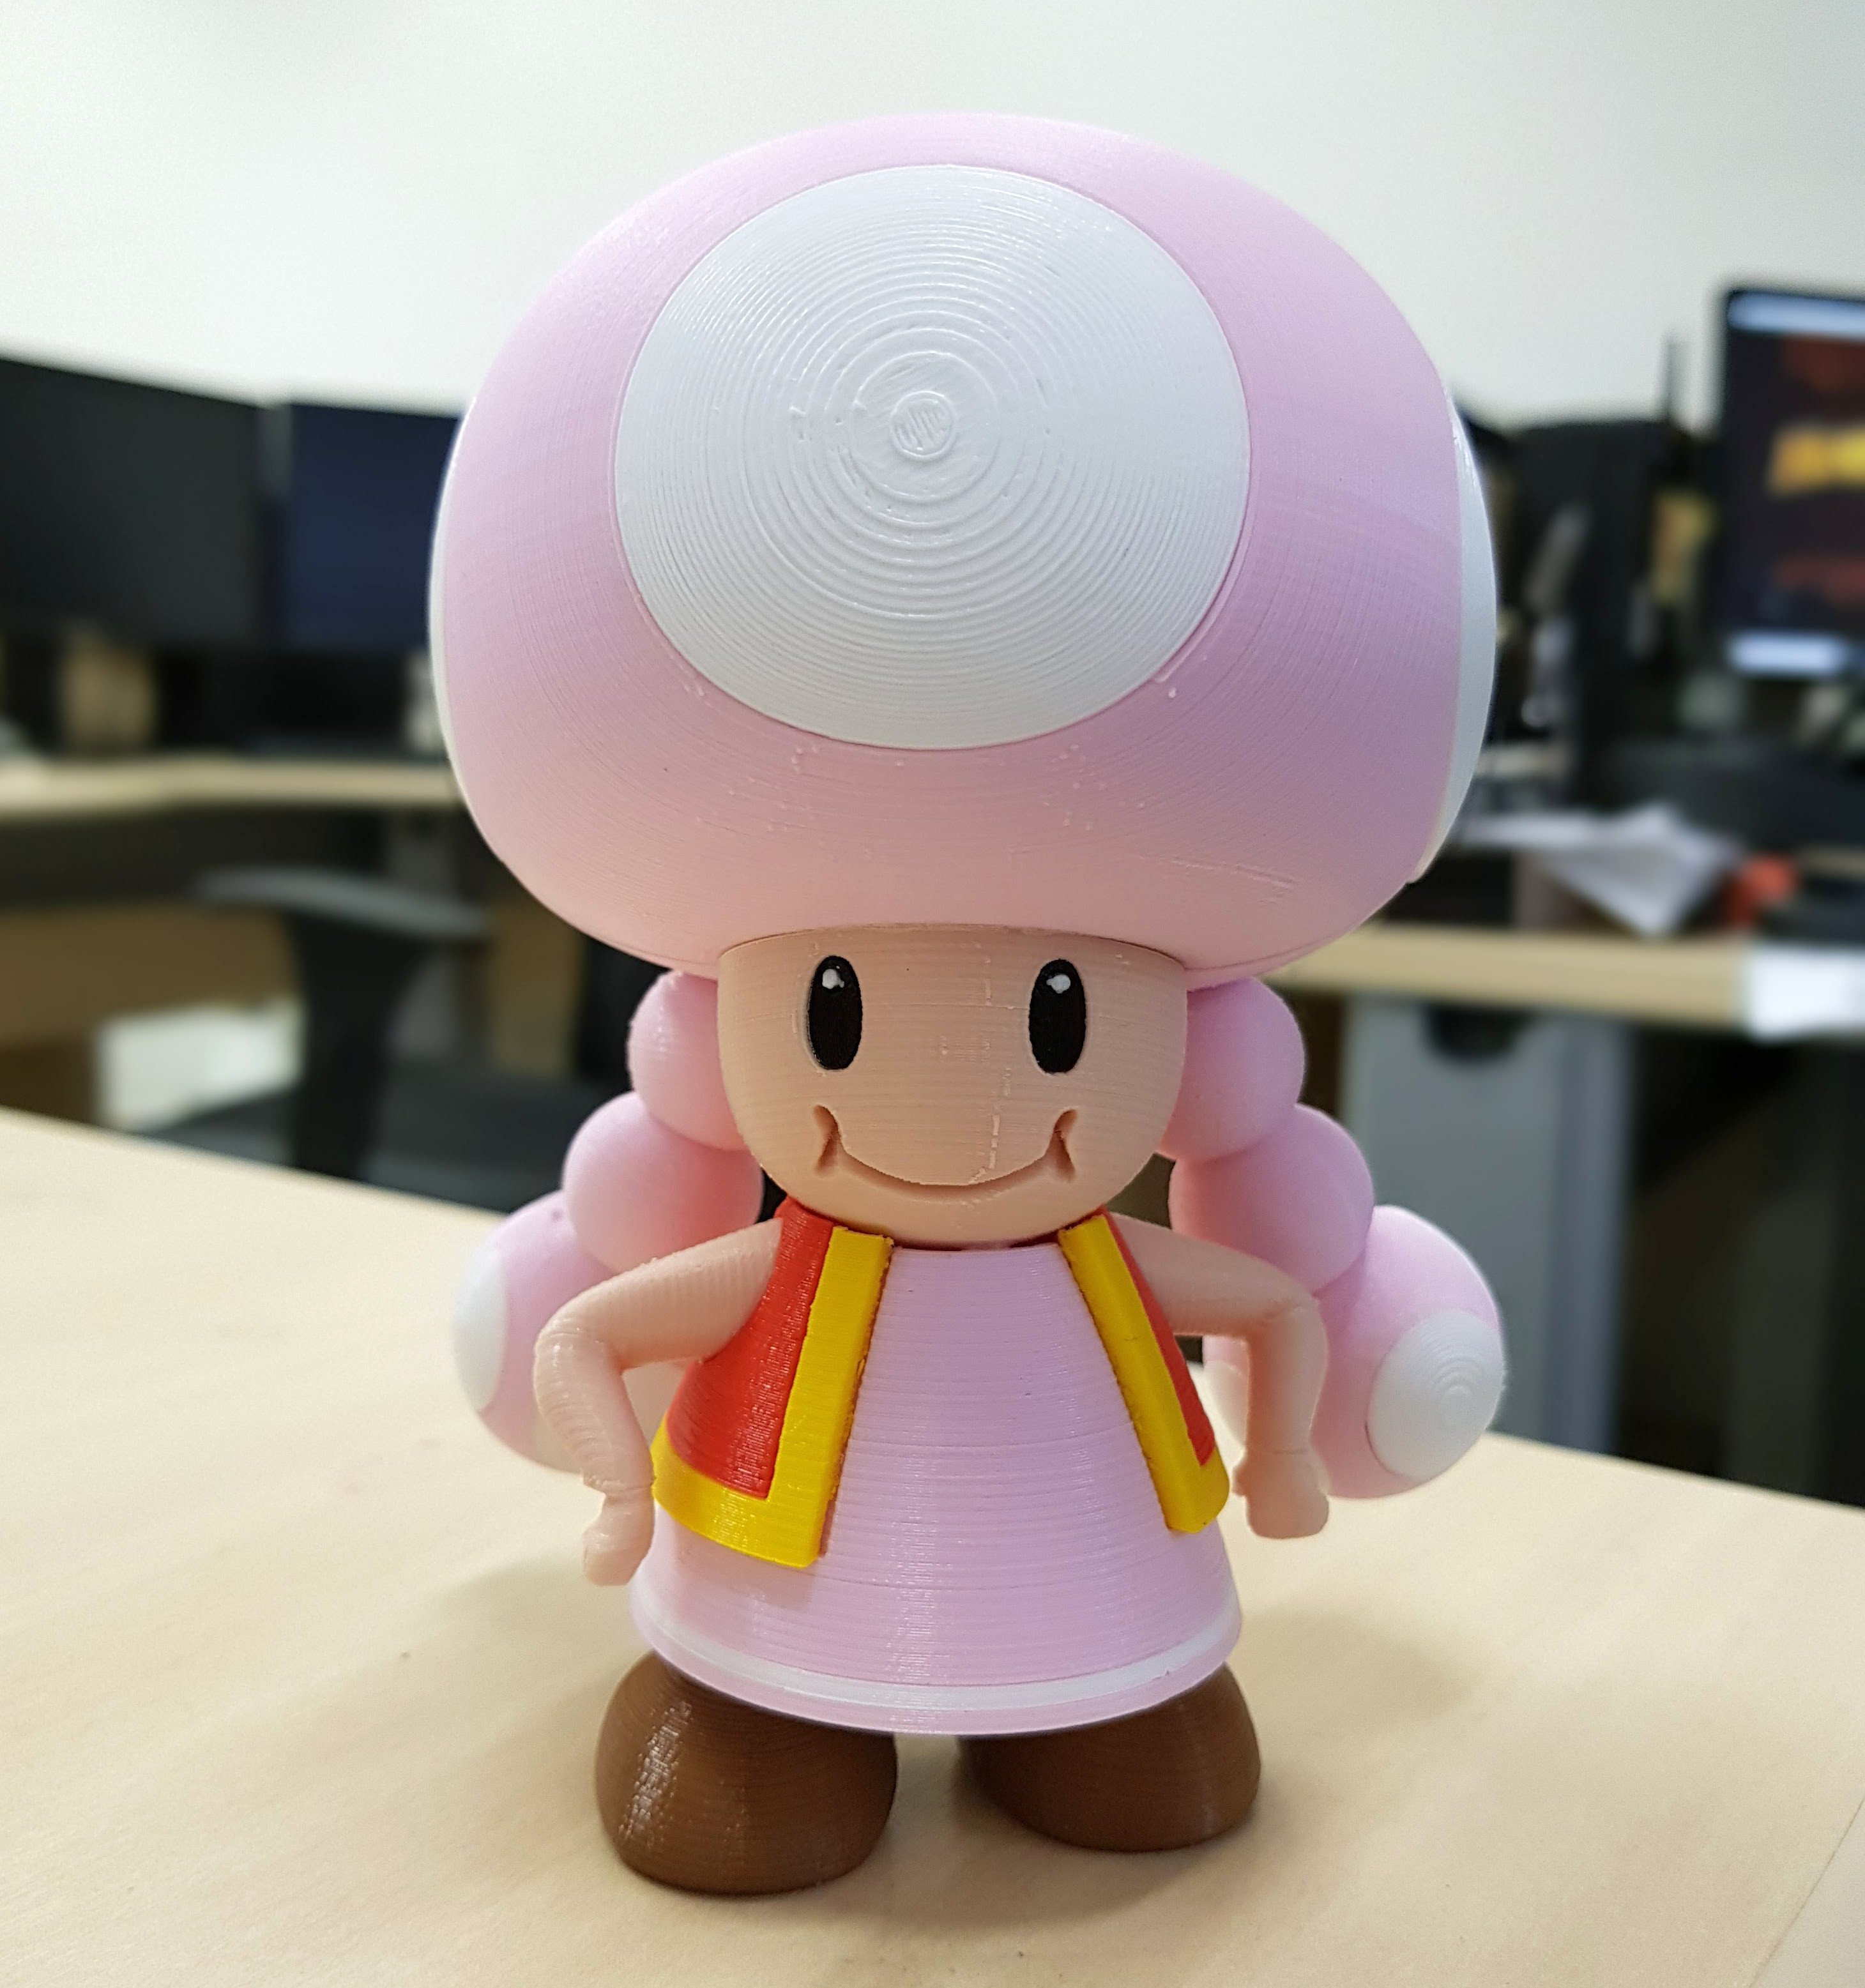 Toadette from Mario games